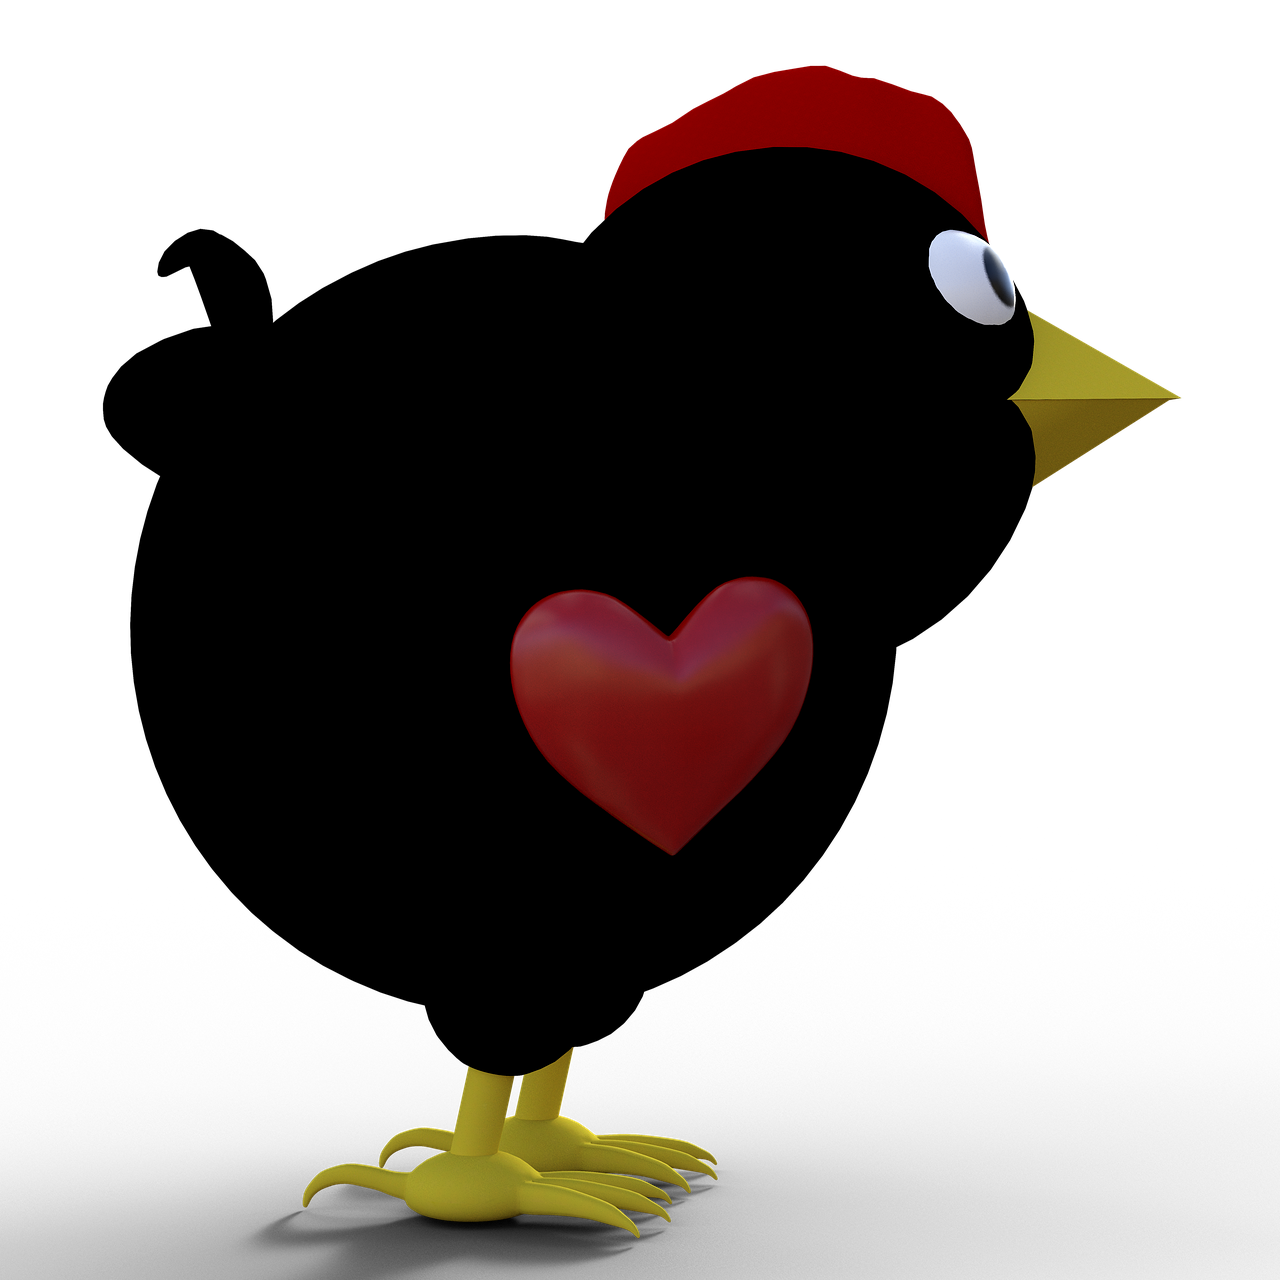 a bird wearing a santa hat next to a heart, a raytraced image, inspired by Heinz Anger, flickr, renaissance, full body close-up shot, black main color, anthropomorphized chicken, flash photo